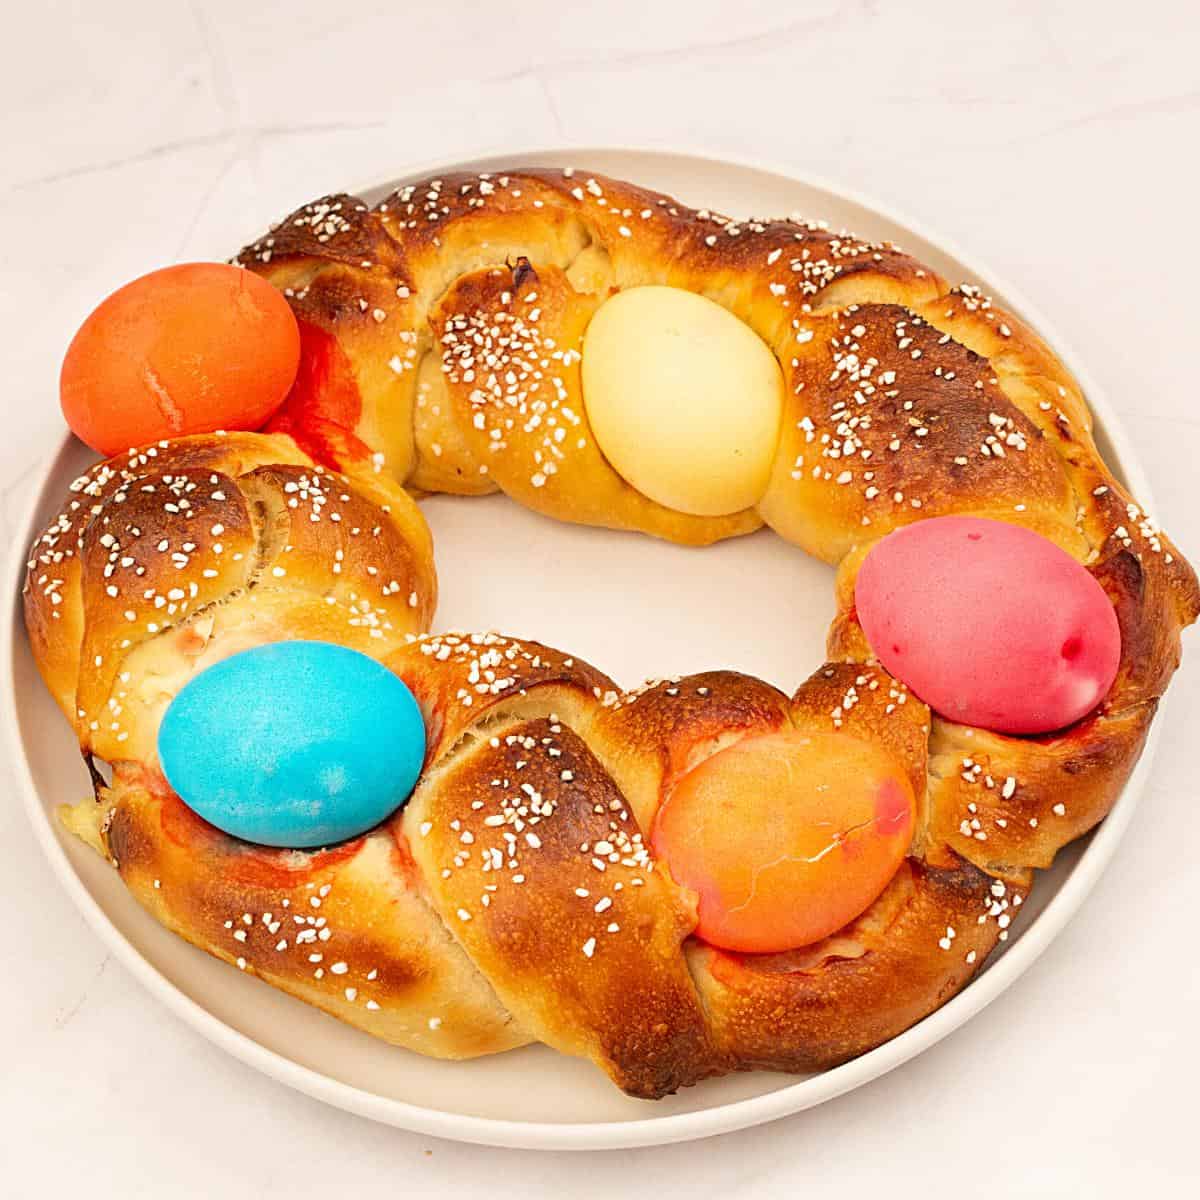 A baked braided bread with easter eggs.